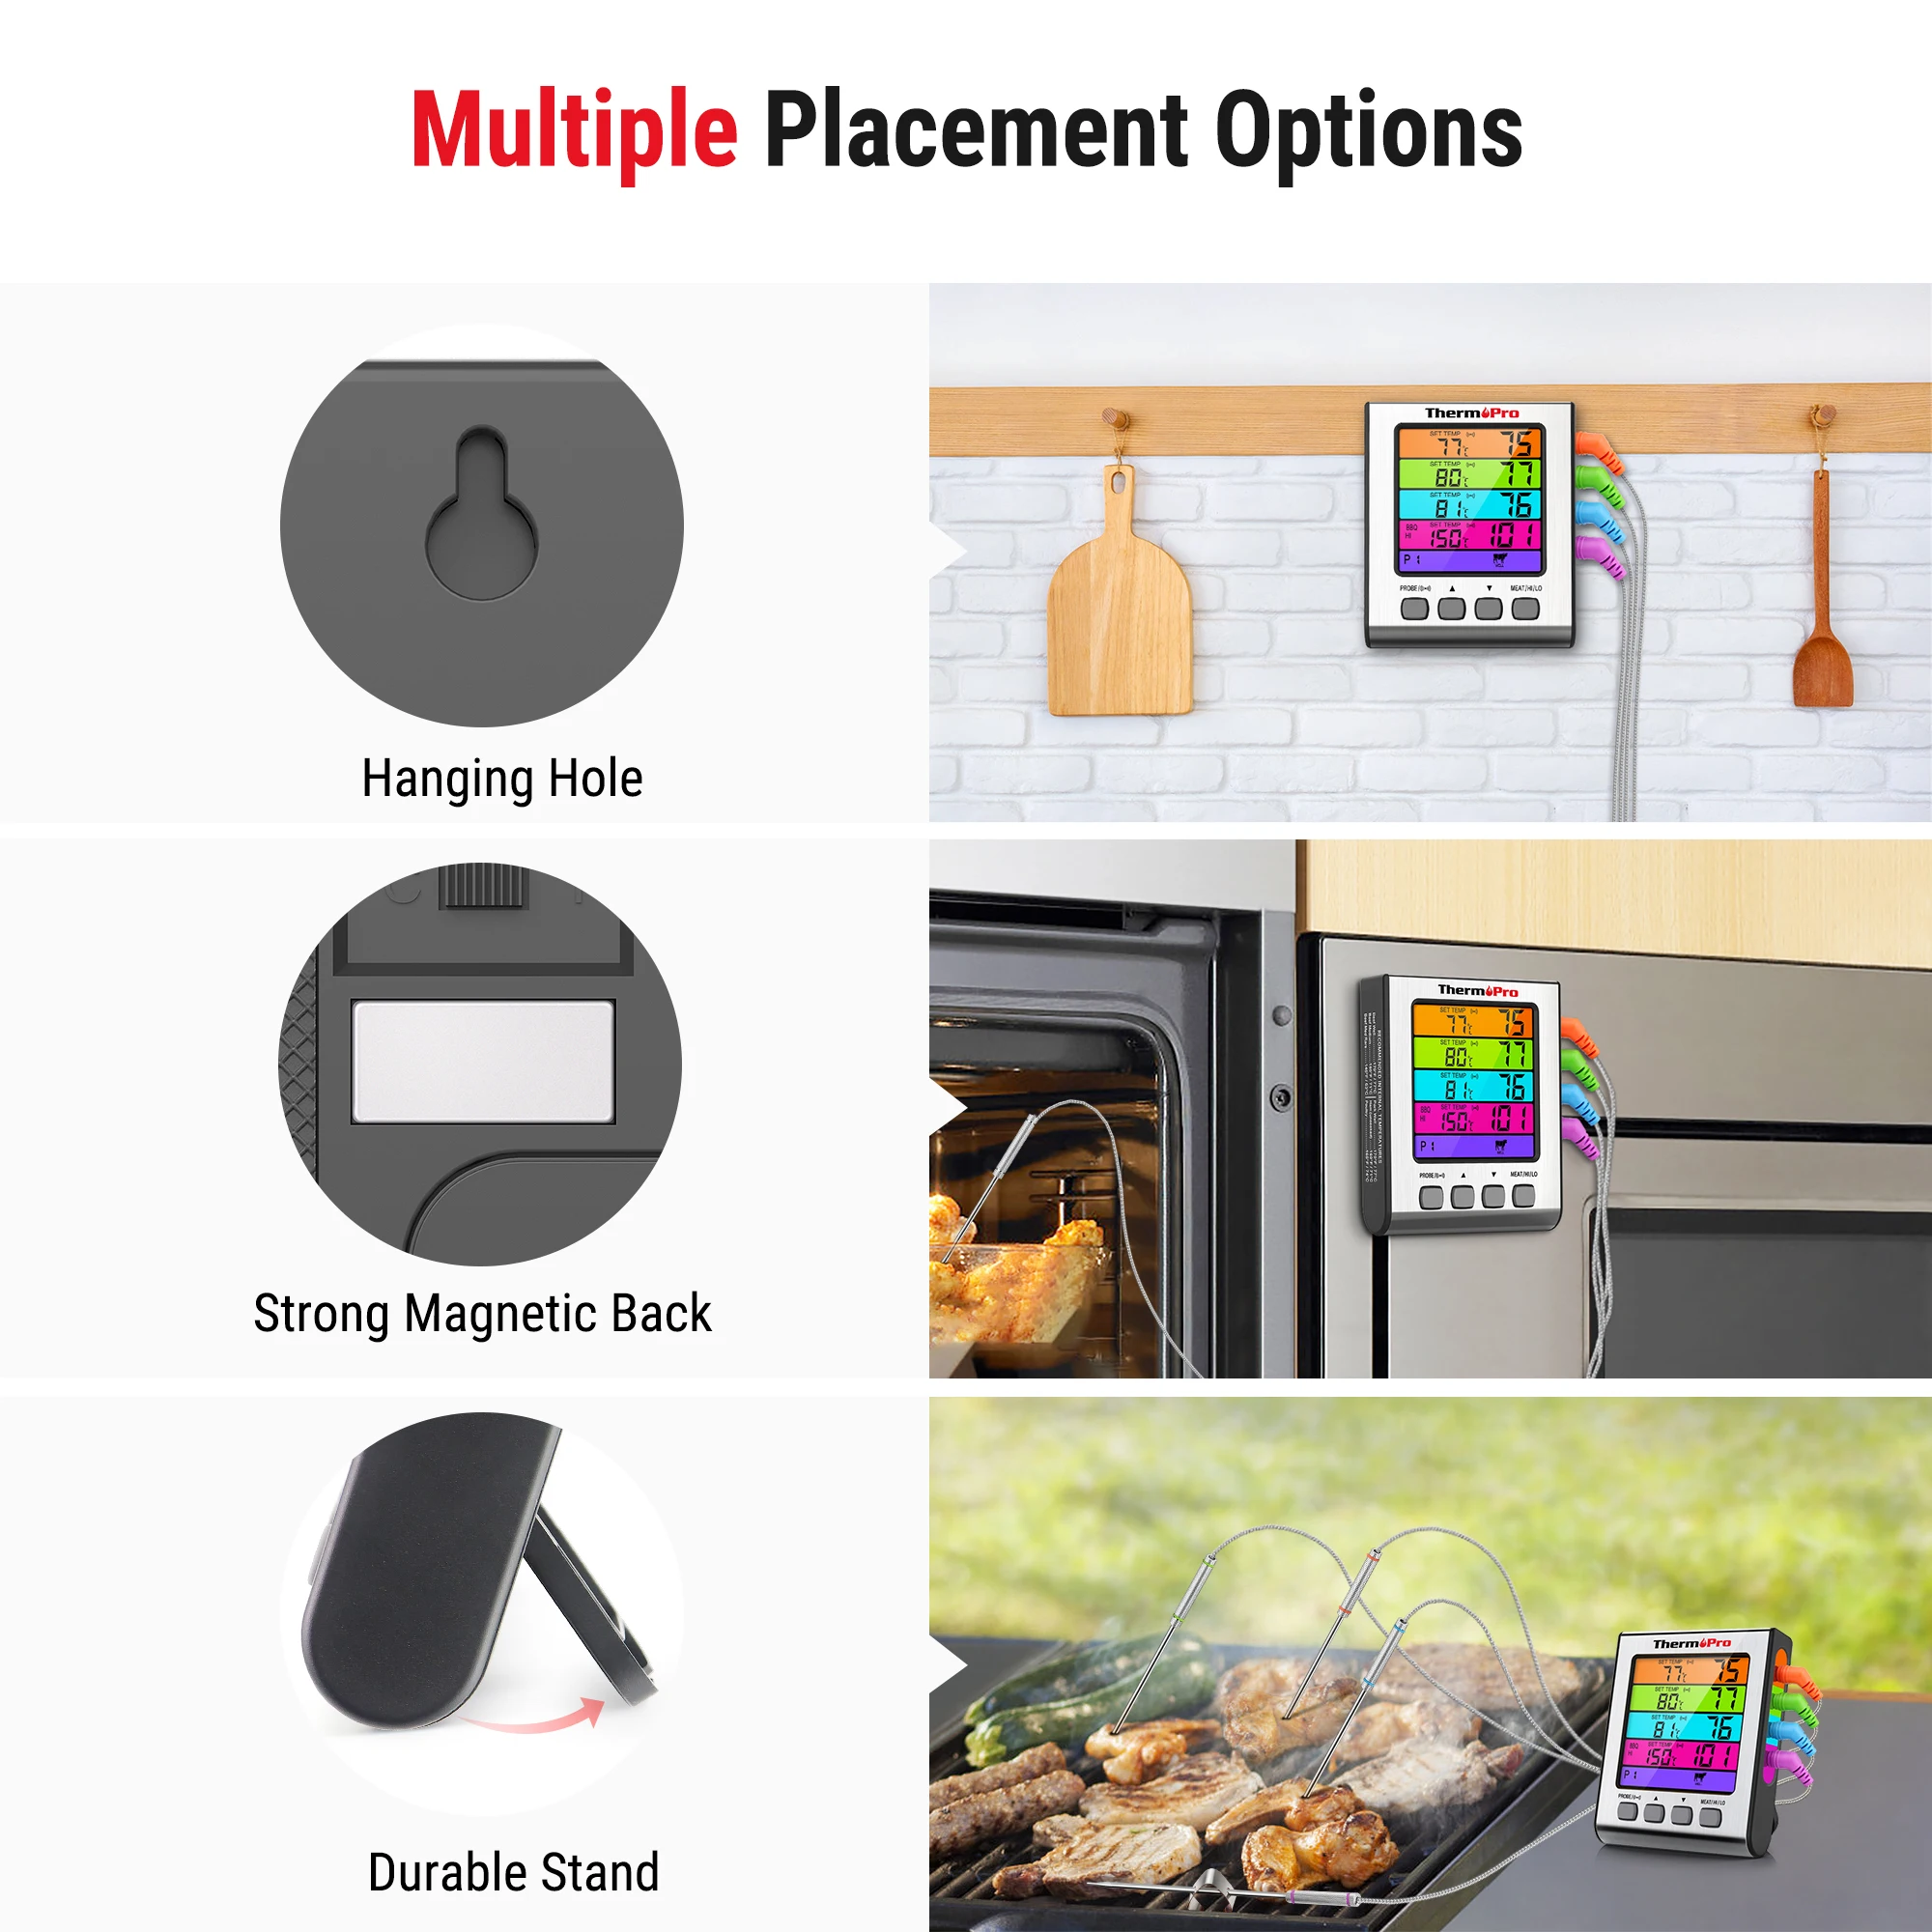 https://ae01.alicdn.com/kf/S5fb9a50eafd64e429fcc92822fb6cbe1X/ThermoPro-TP17H-4-Probes-4-Colors-Backlight-Large-LCD-Display-Digital-Kitchen-Cooking-Smoking-Oven-Meat.jpg